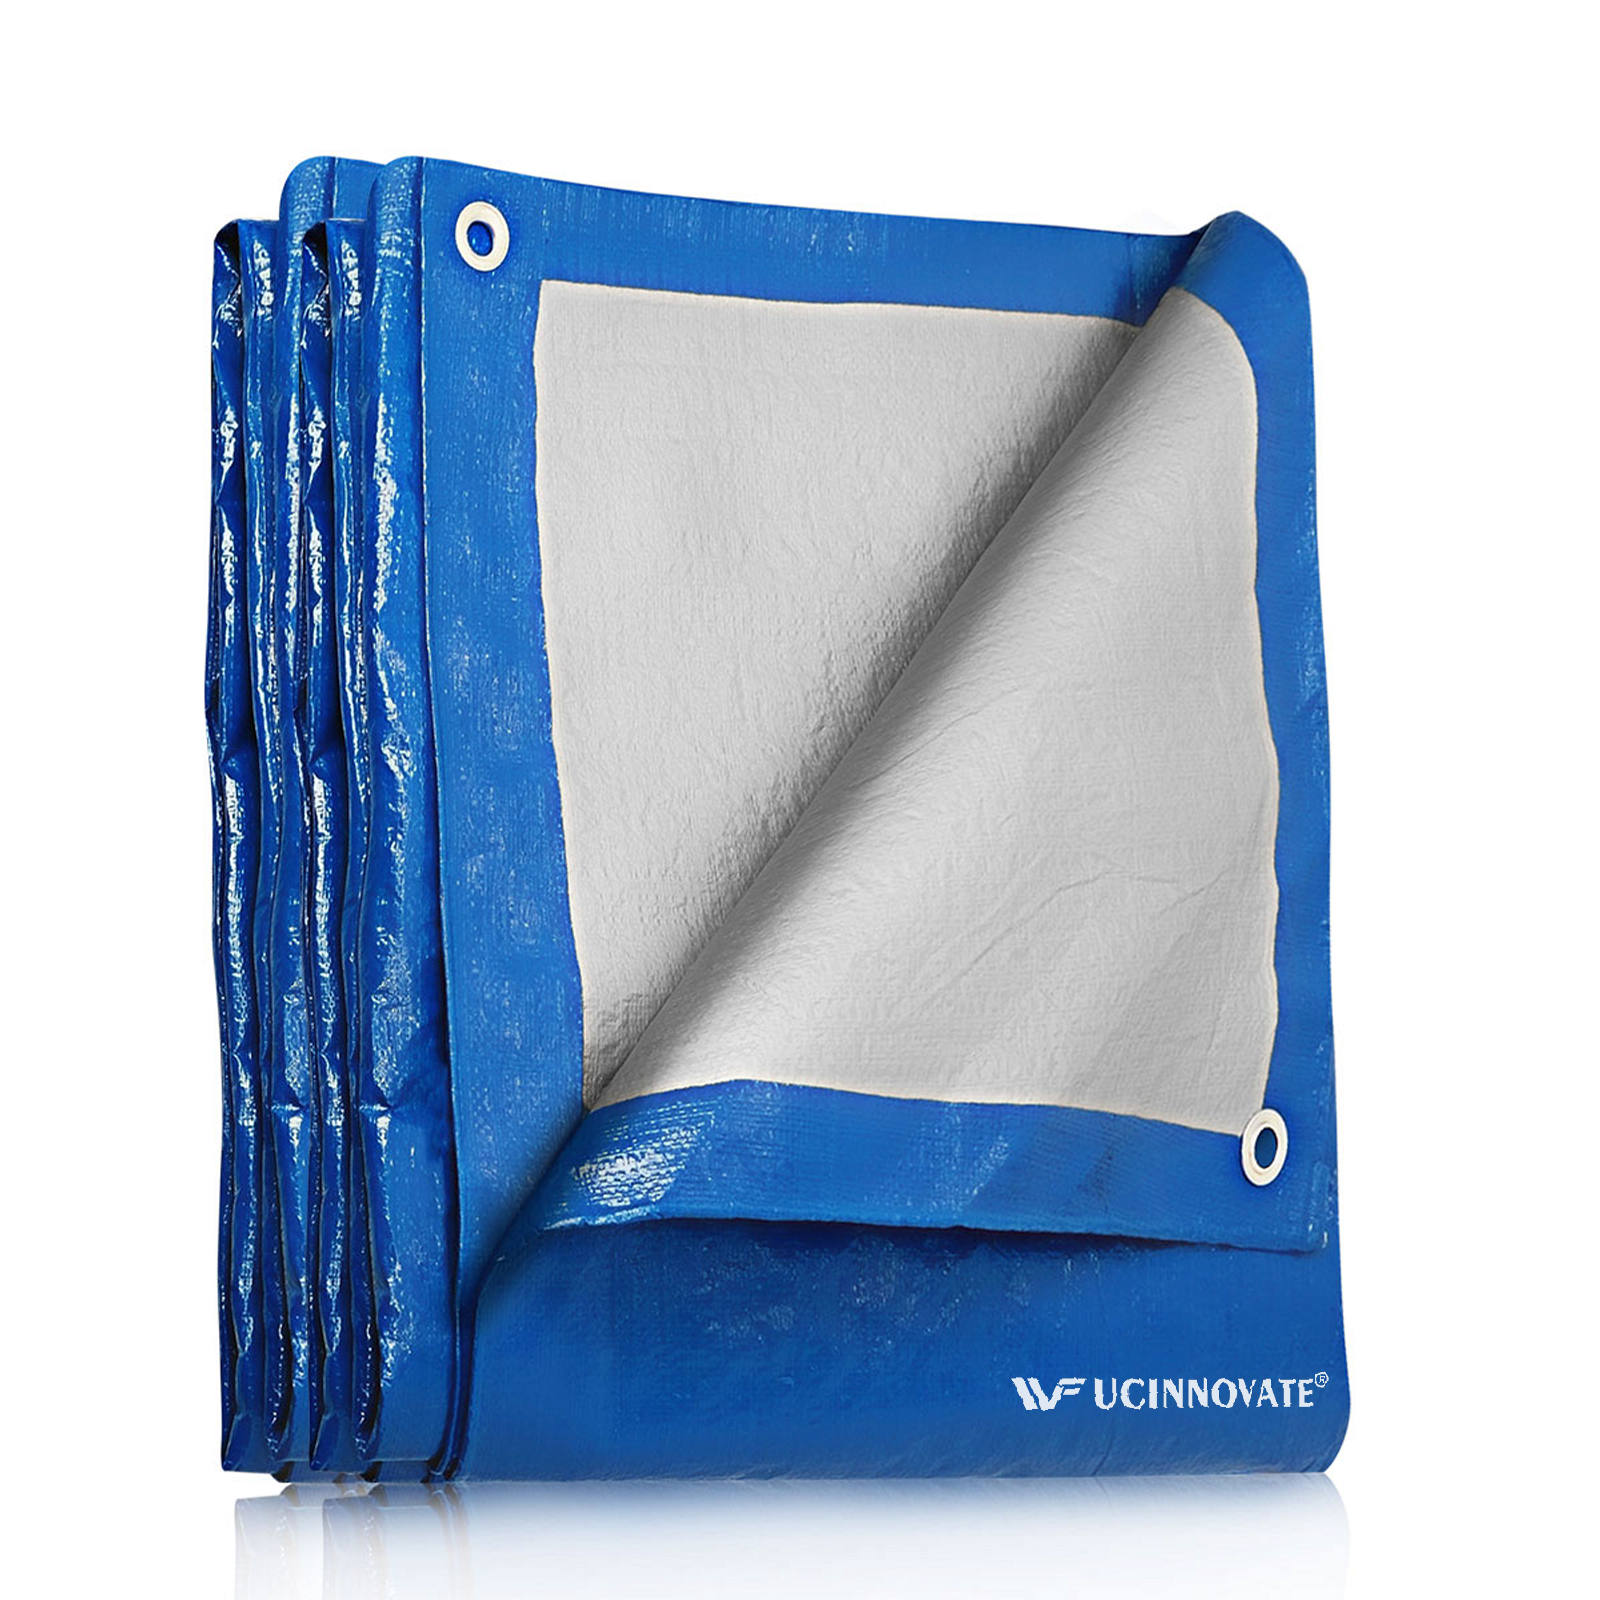 UCINNOVATE 10 x 10 ft Heavy Duty Blue/Silver Tarp Waterproof Poly Tarp Cover with Metal Grommets